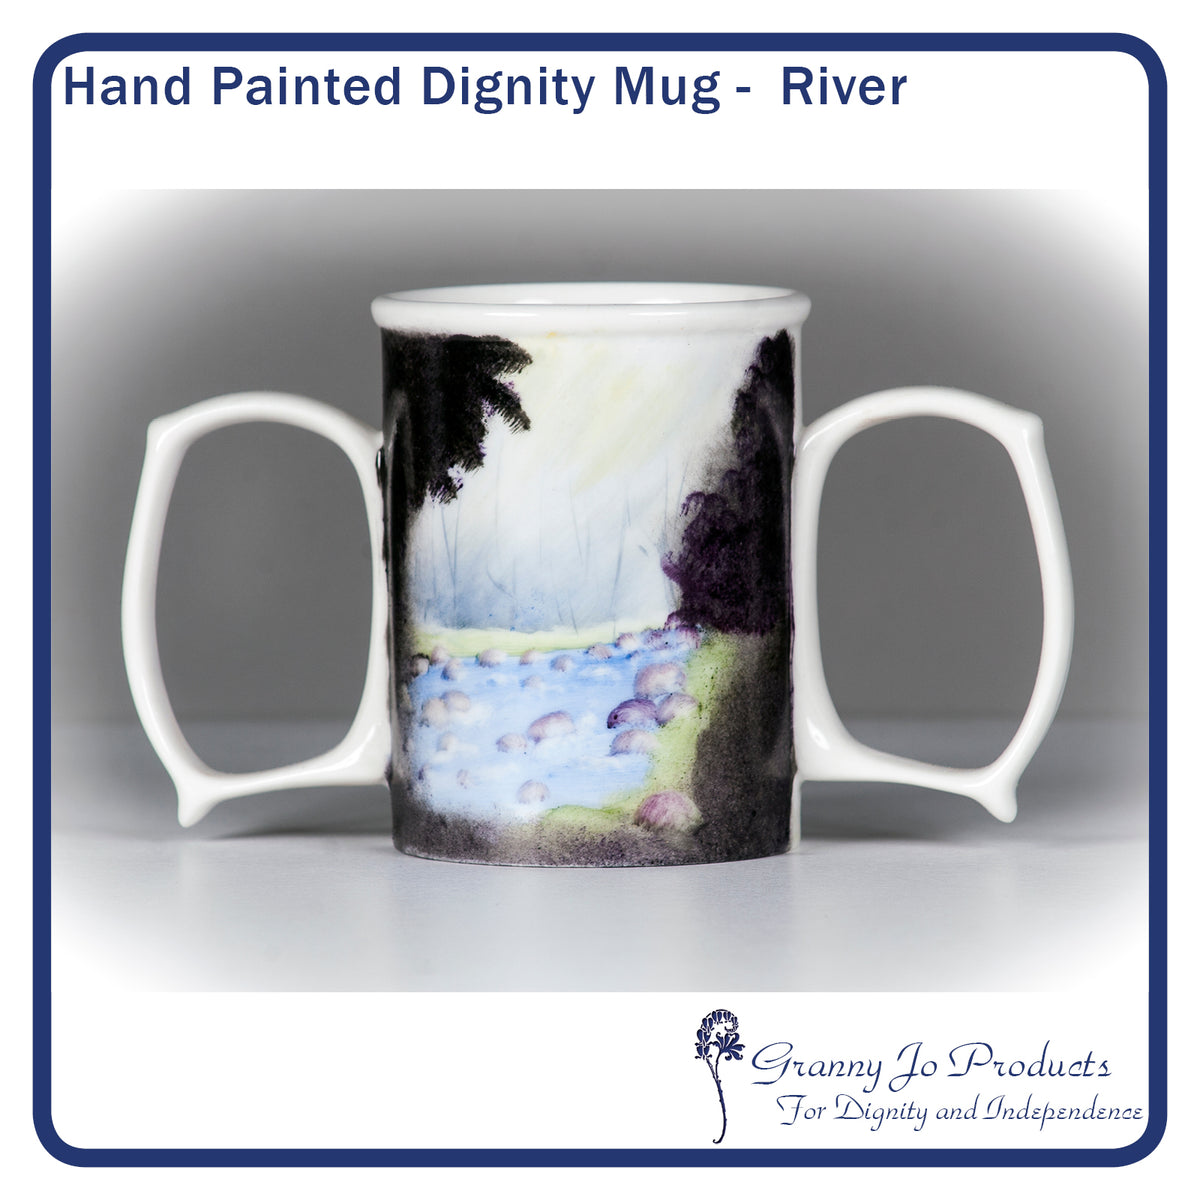 Granny Jo Dignity Mug :: two handle coffee cup provides increased stability  and control for users with limited hand strength, tremors.